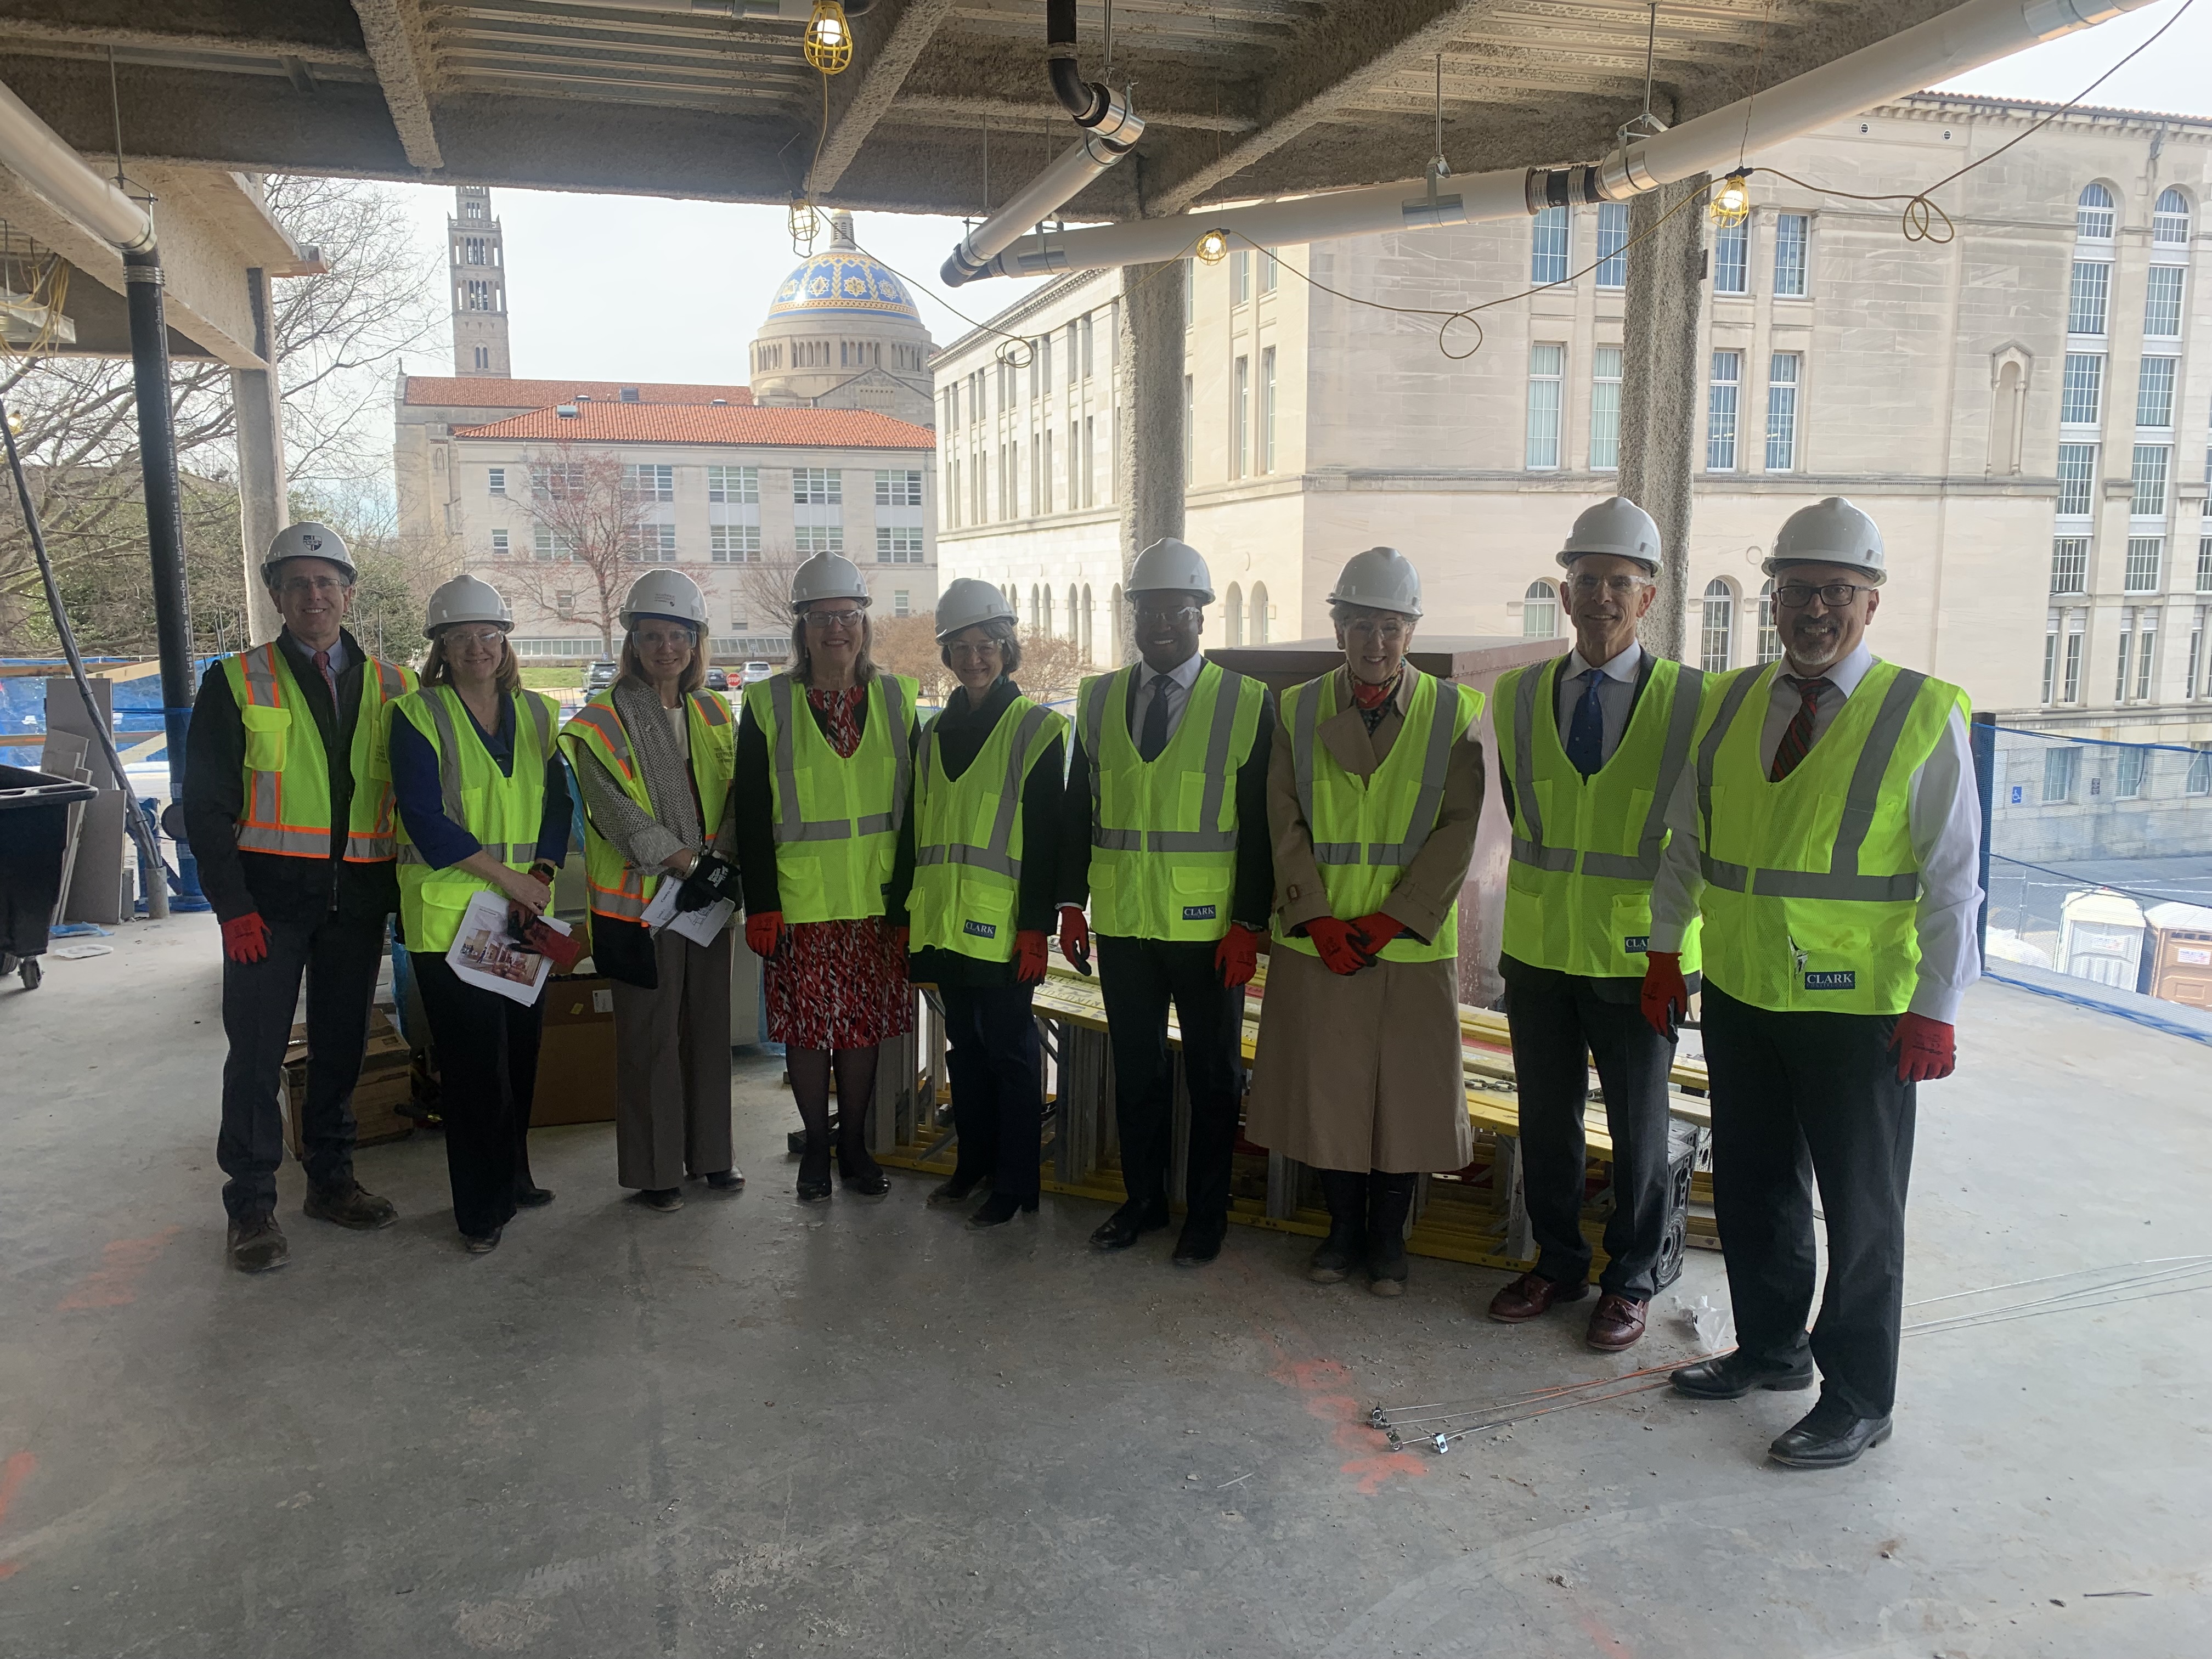 Tours Begin At The New Conway School of Nursing Building